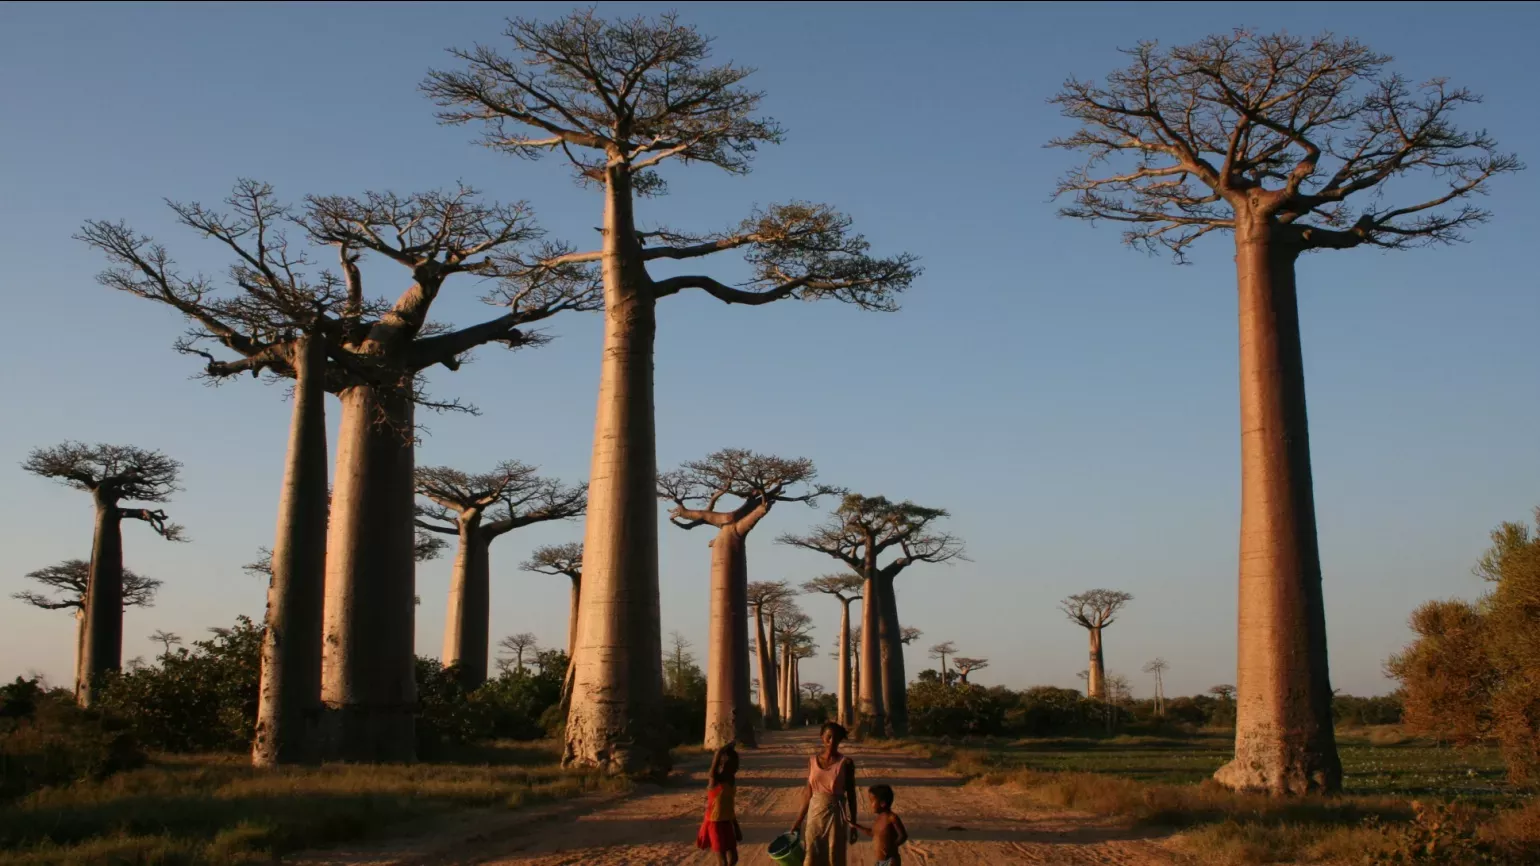 Family in Madagascar walking down a road lined with Baobab trees